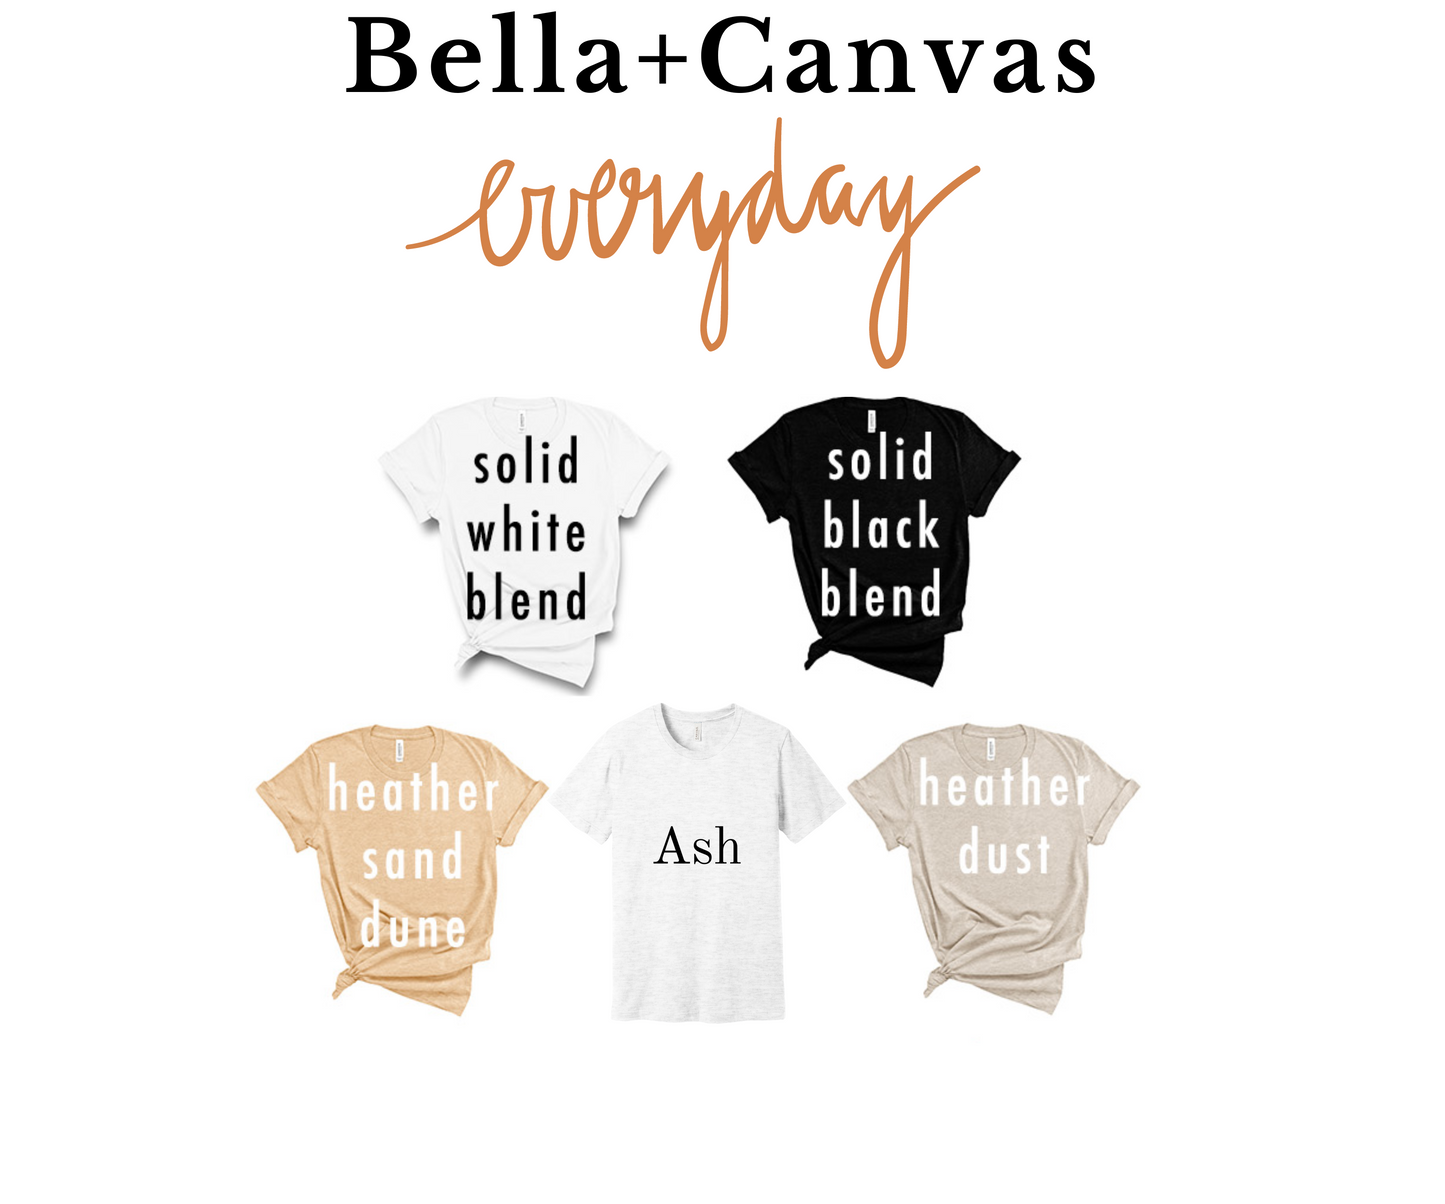 Blessed by God Spoiled by my Husband Bella Canvas T-shirt